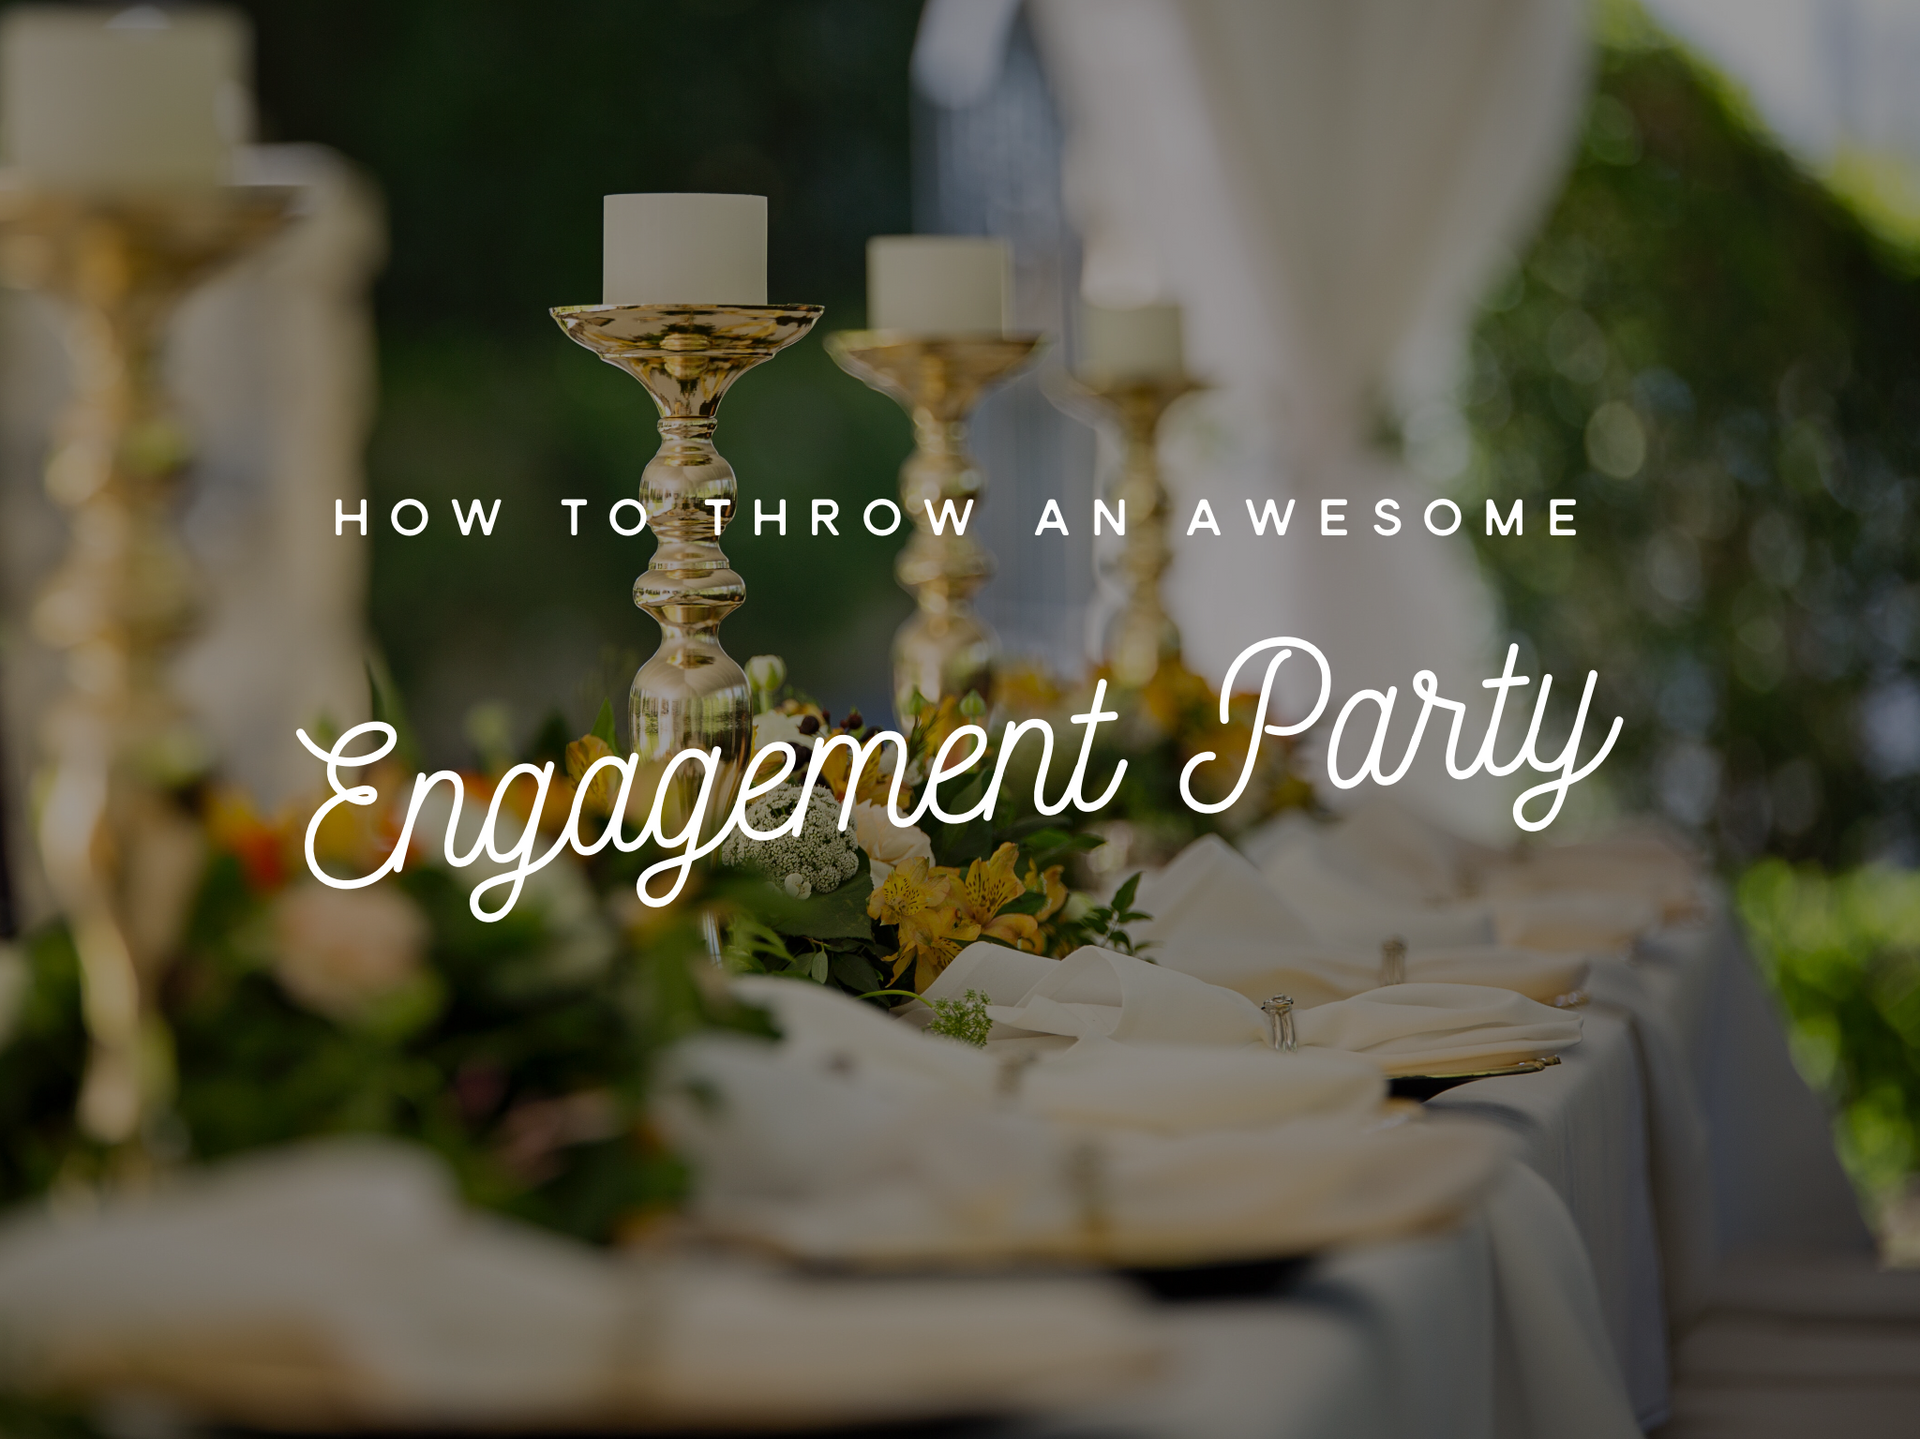 How to Throw an Awesome Engagement Party